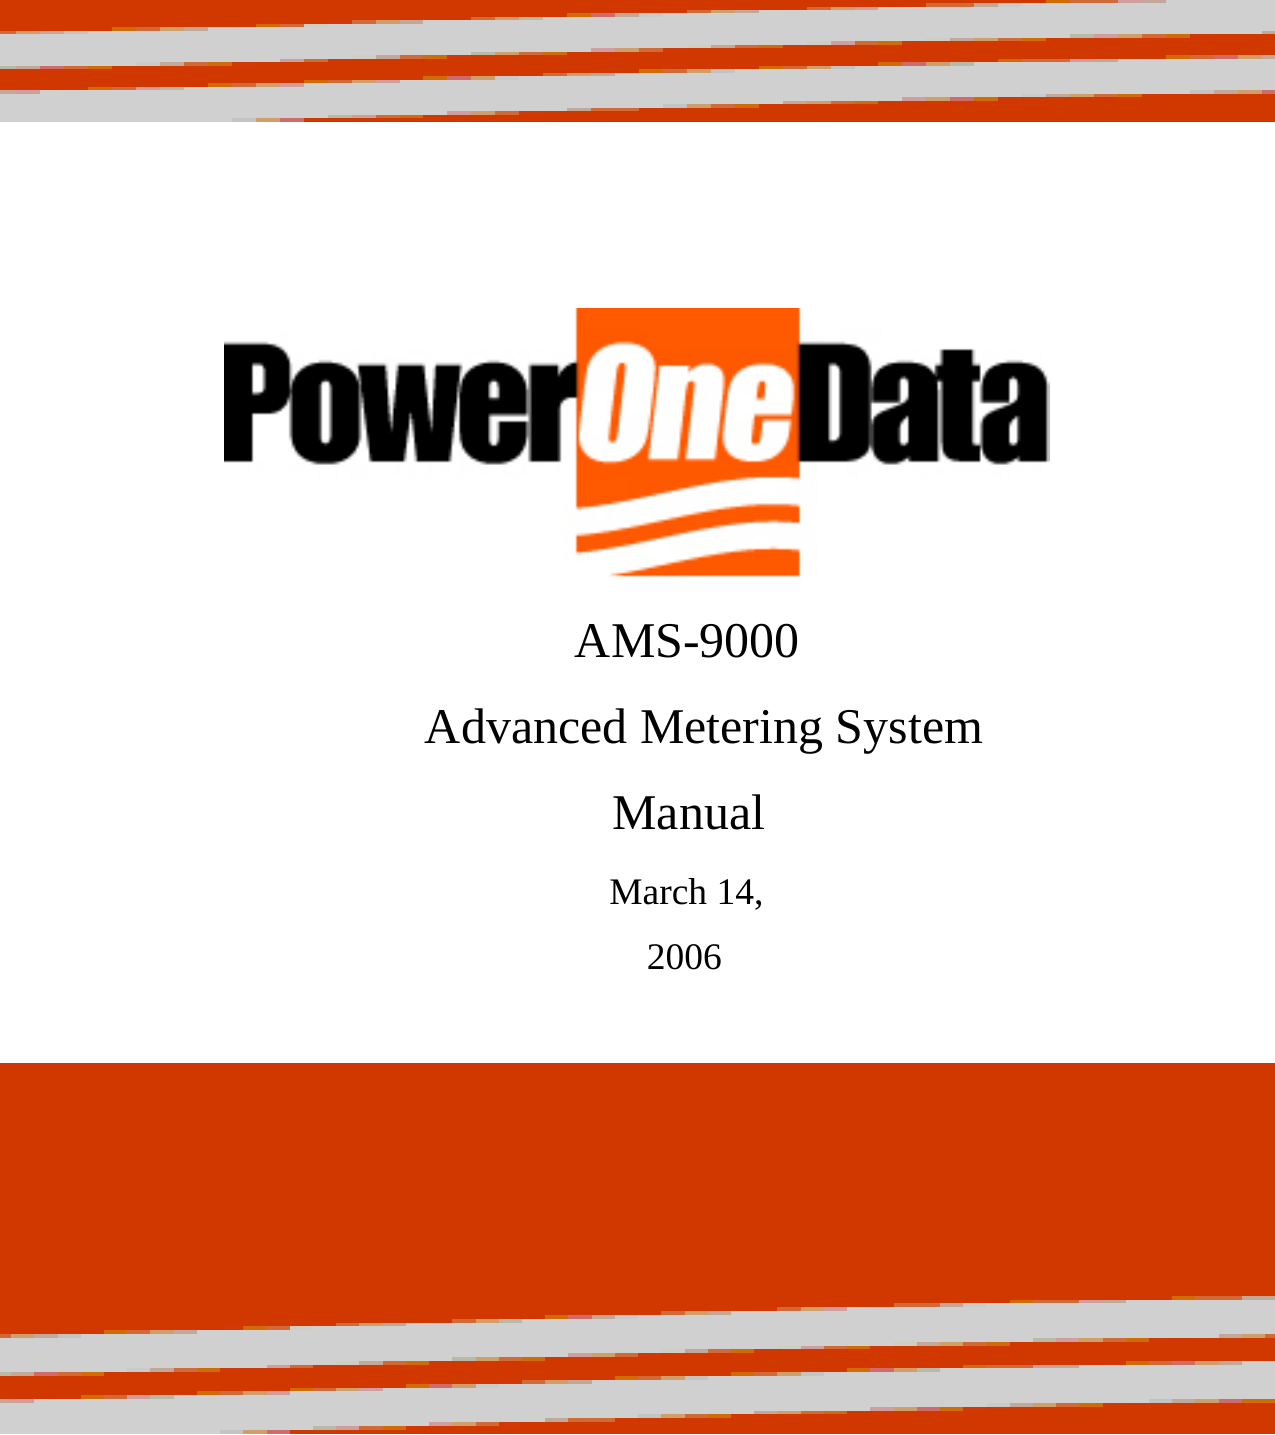                        AMS-9000                                   Advanced Metering System                                                  Manual                                                                  March 14,                          2006        